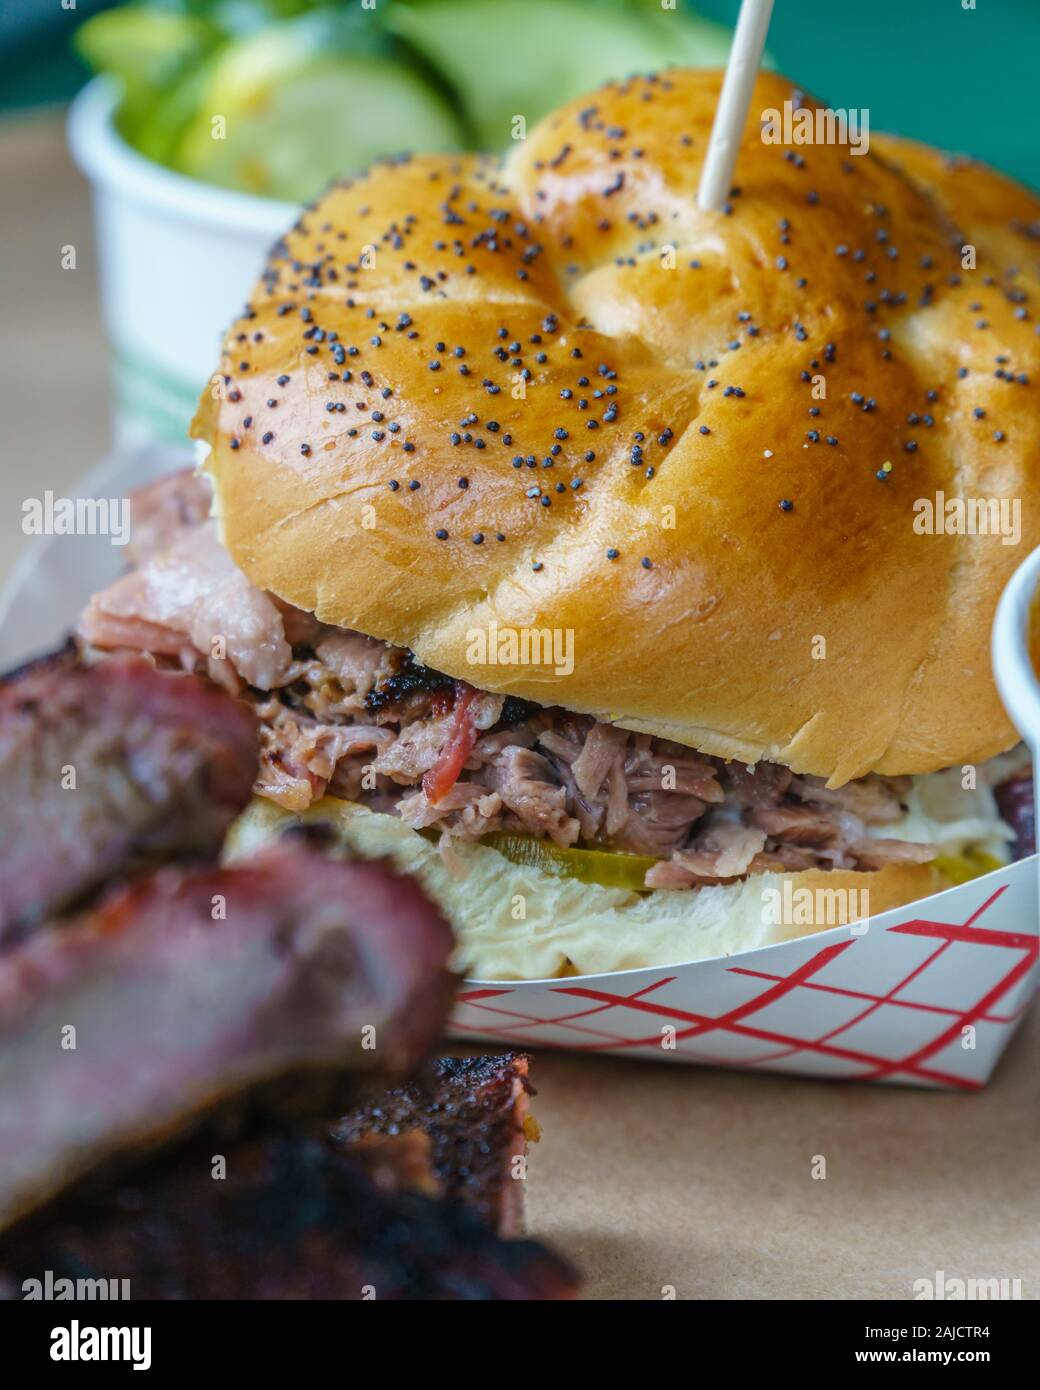 Close-up view of southern U.S. barbecue meal including ribs, pulled pork sandwich and barbecue beans. Stock Photo